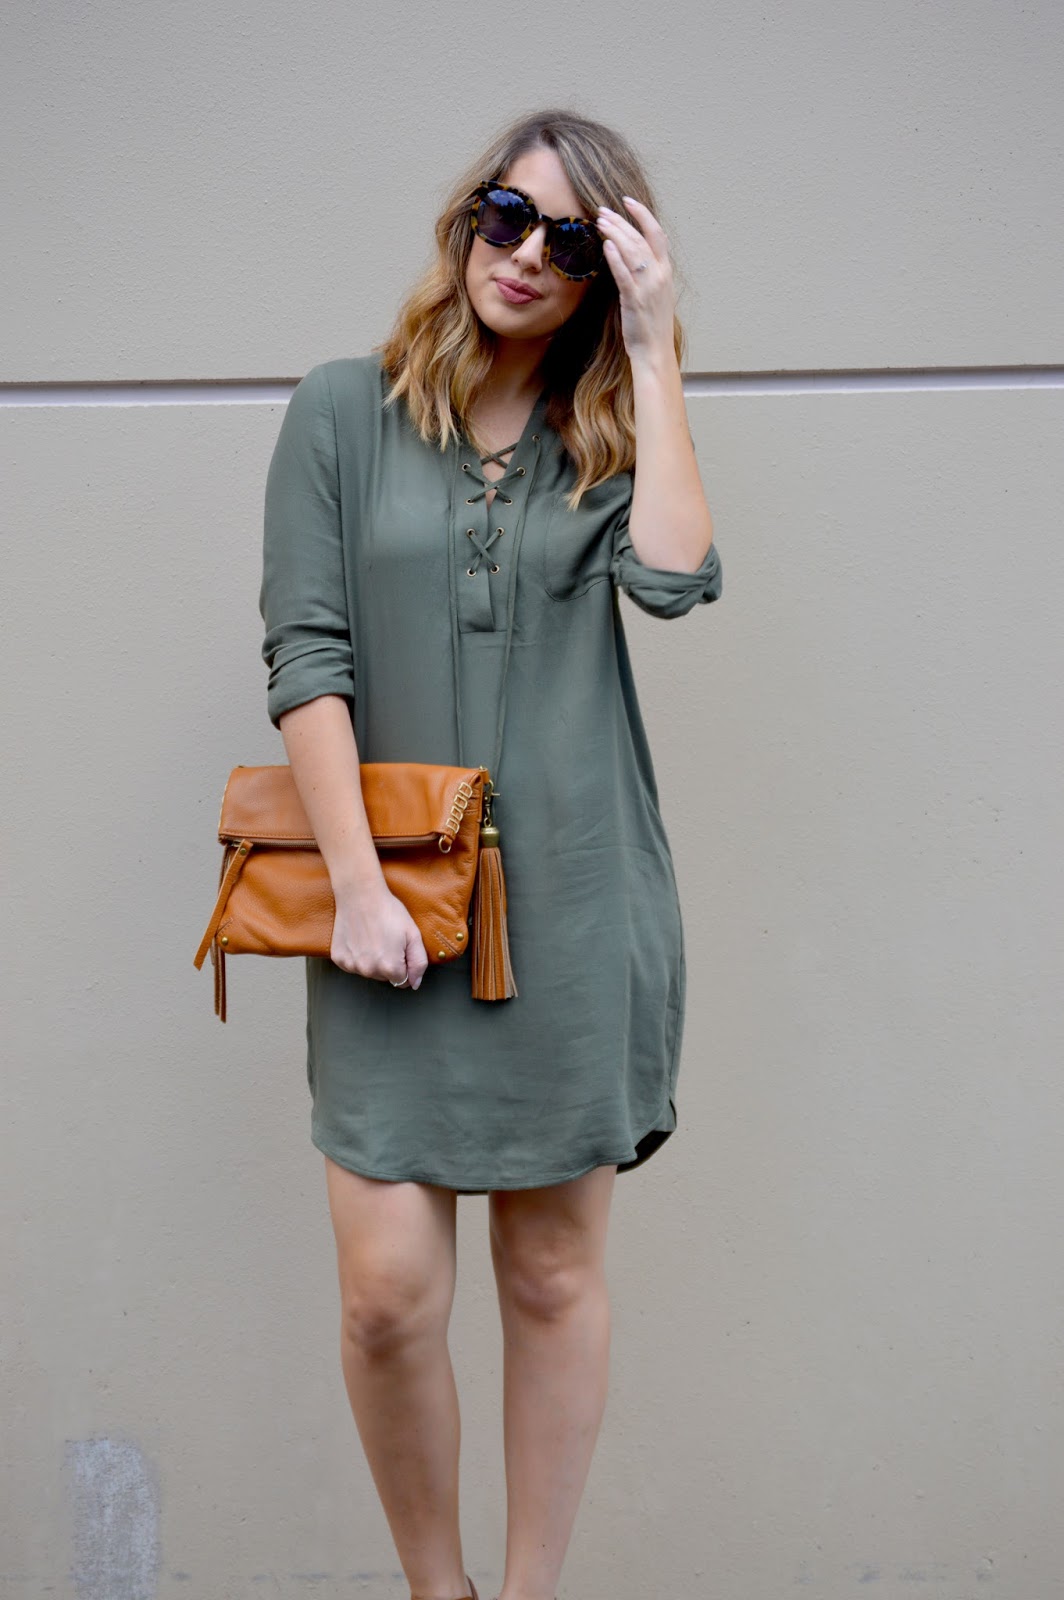 Rosy Outlook: The Dress You Need for Fall + Exciting News!